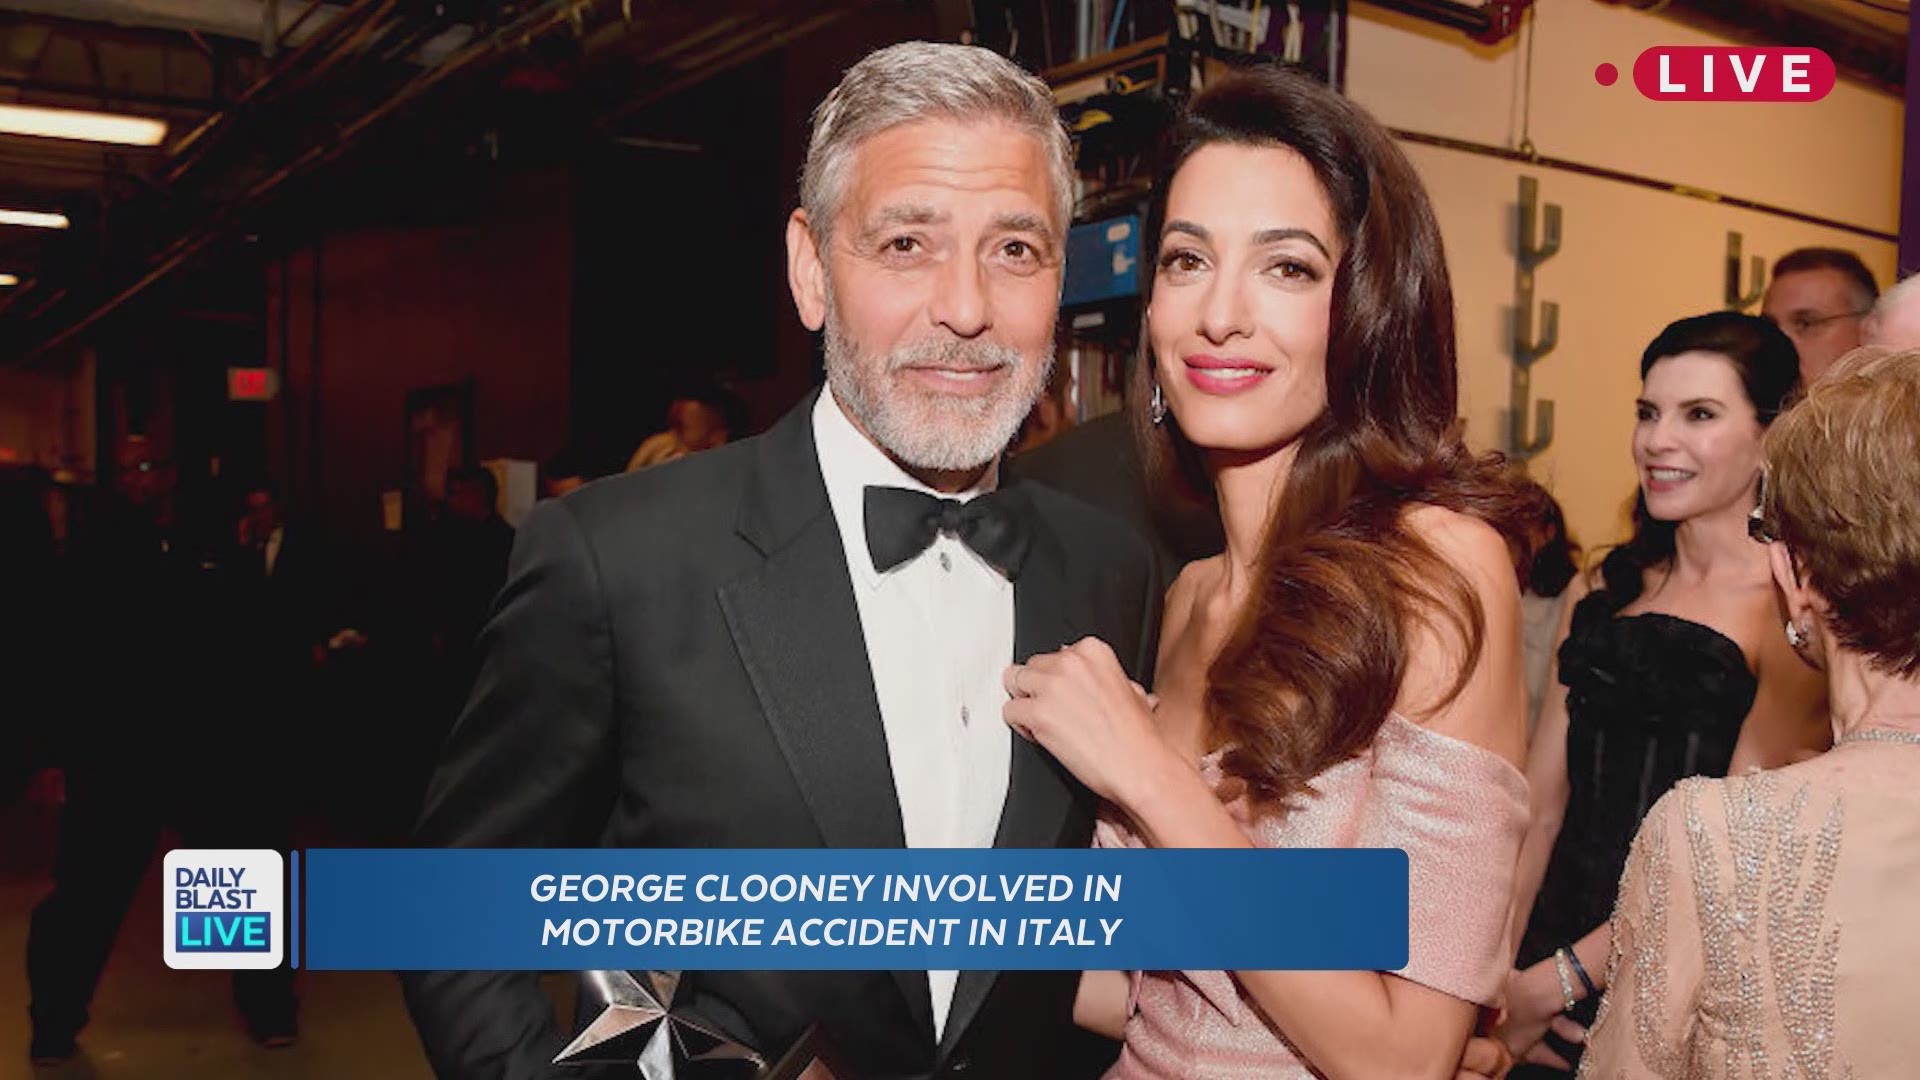 Actor George Clooney was taken to the hospital in Sardinia and released after his motor scooter and a car collided on the Italian island Tuesday, hospital officials said. Clooney reportedly was in Sardinia filming a television miniseries adapted from Jose